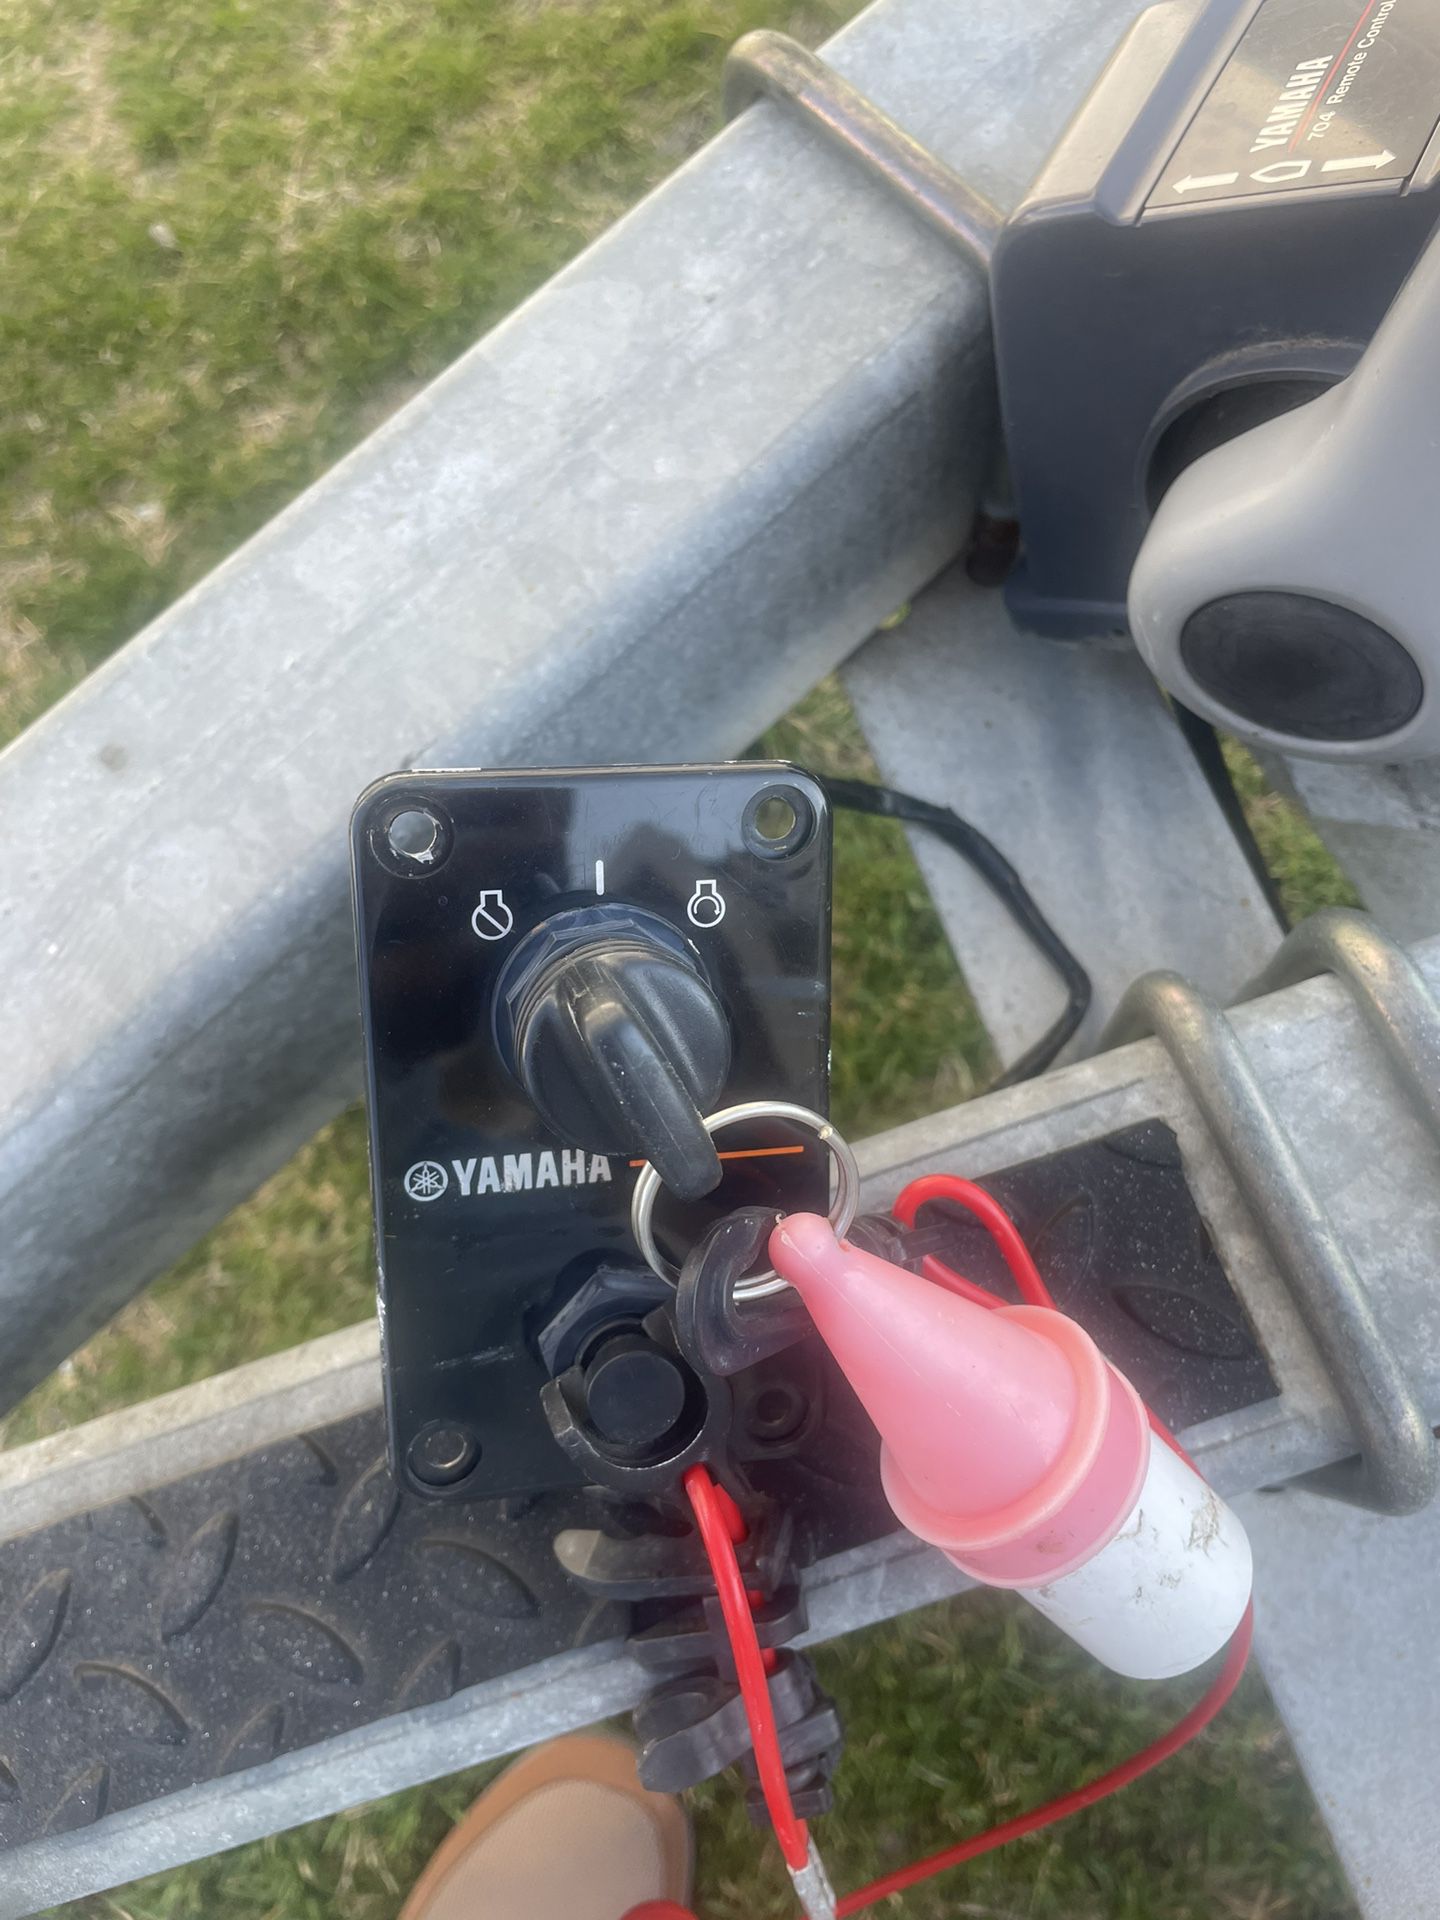 Yamaha key switch assembly. $75   I can ship   This key switch assembly was working fine before it was removed from my boat for a re power.